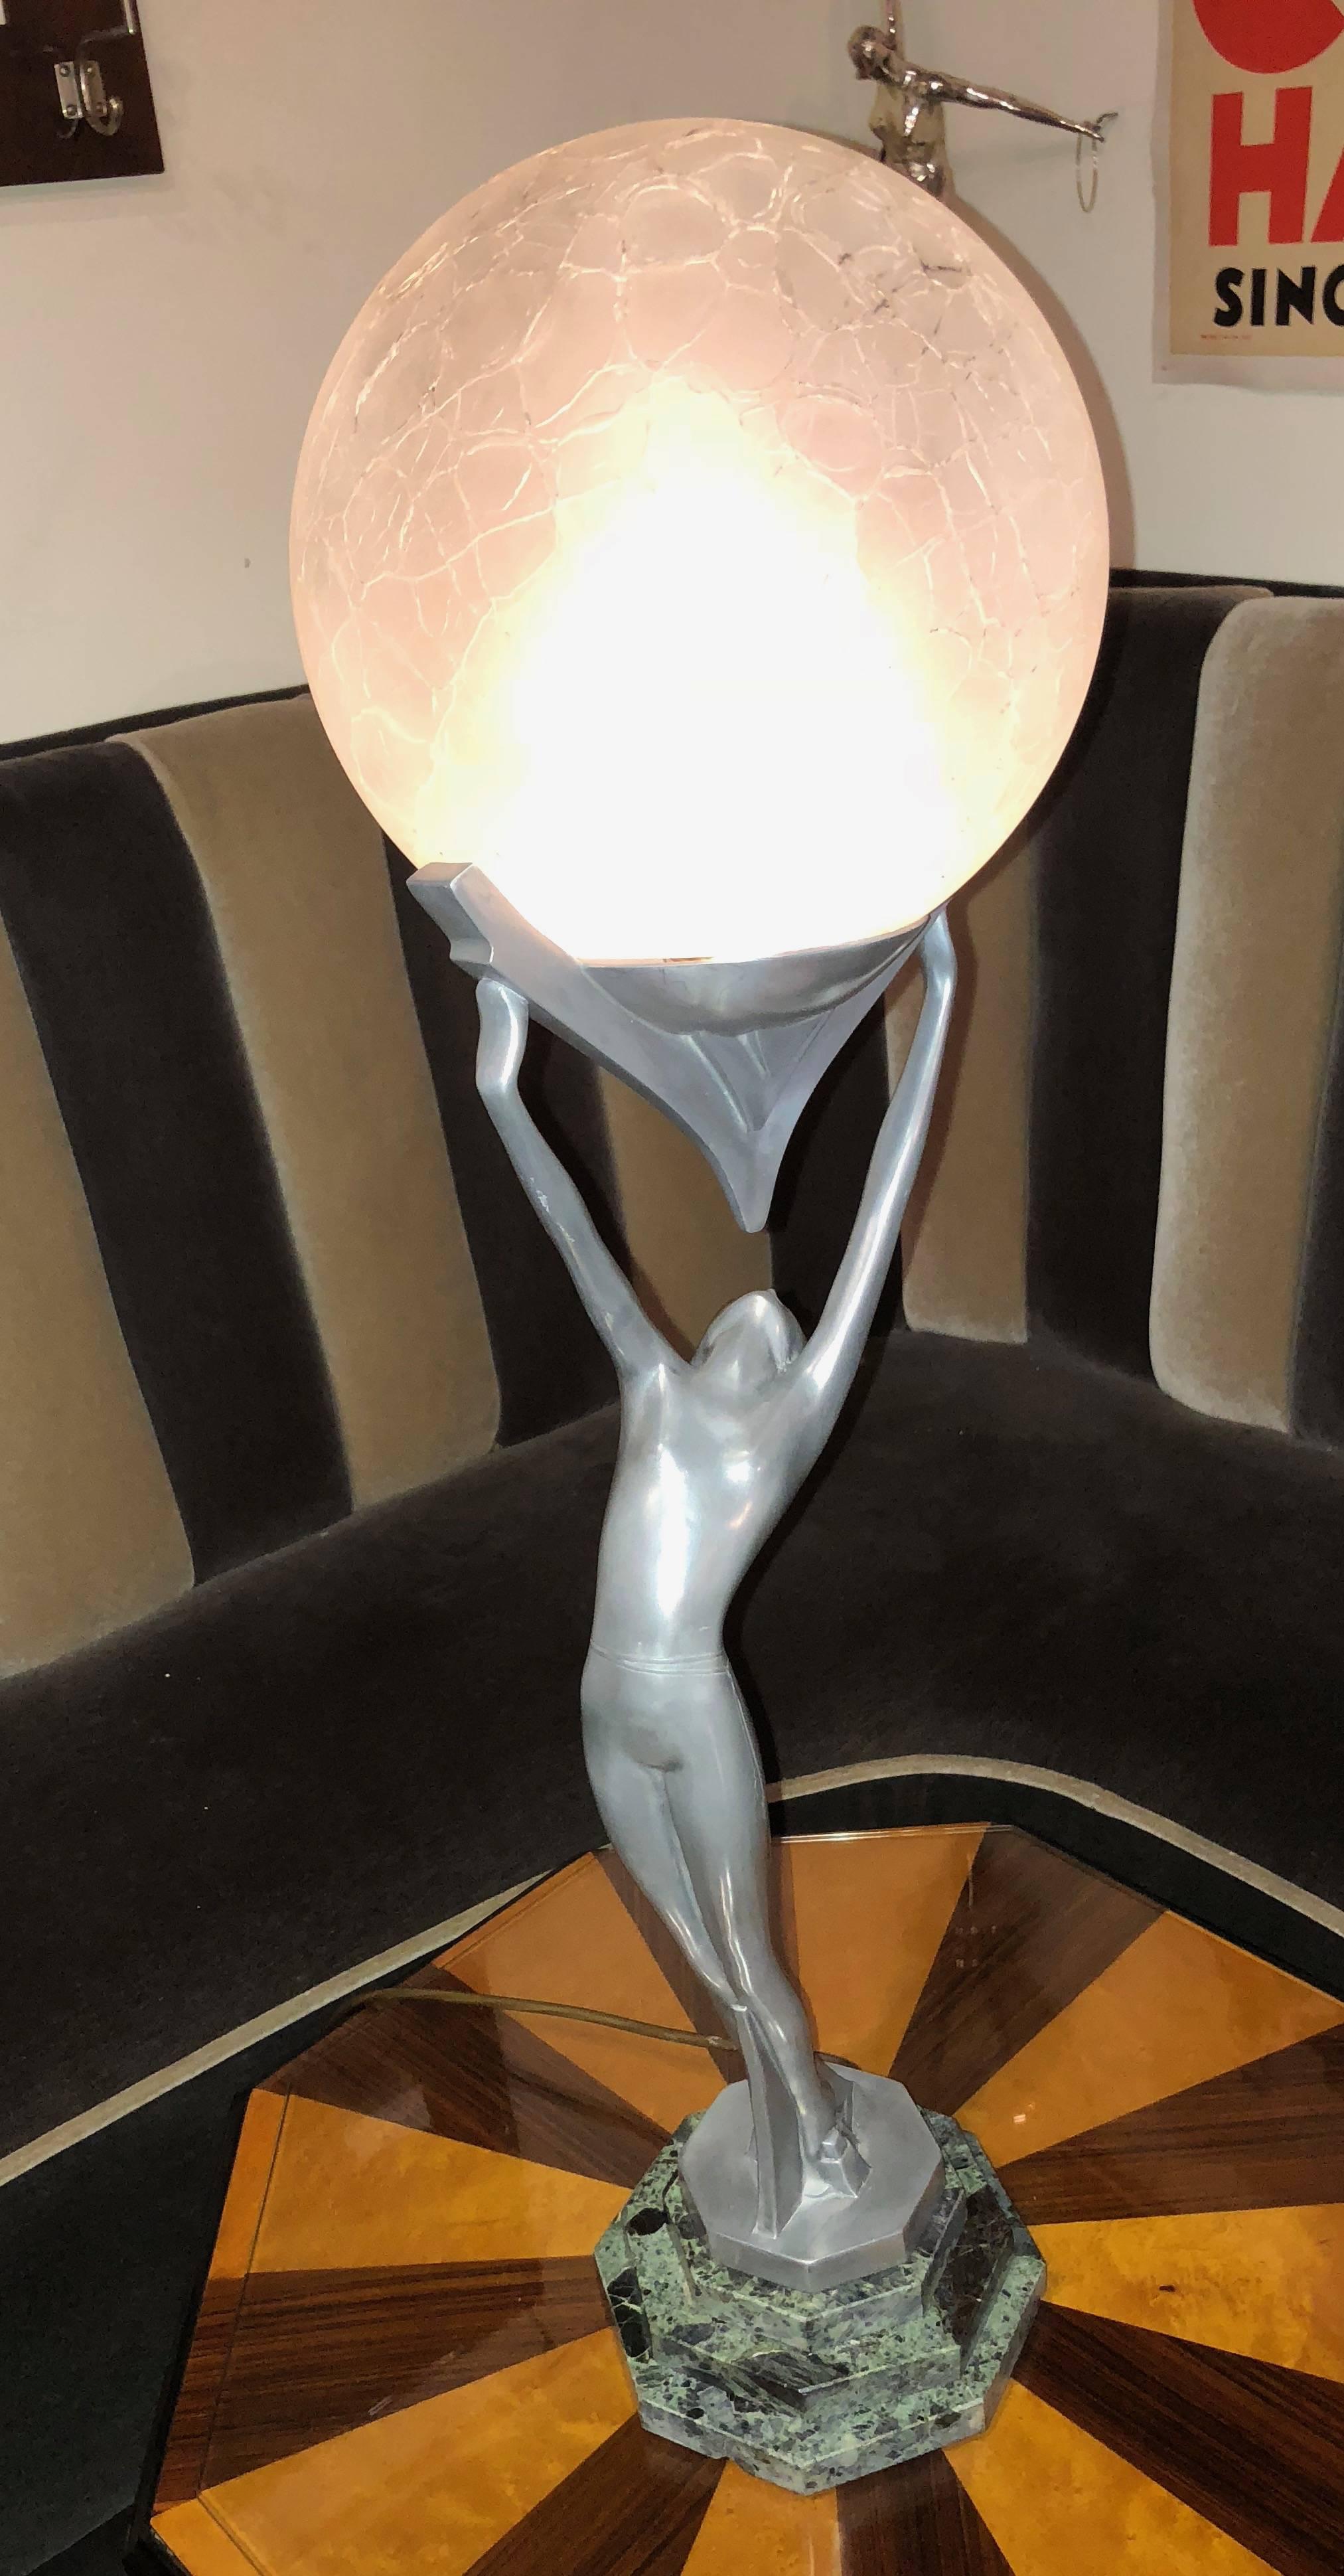 Frankart lamp of a nude stylized figure holding a glass globe on stepped marble base. This rare and unique piece may be just one of kind, a pro-type designed but never commercially or widely produced. It is a stunning figure standing 30 inches tall